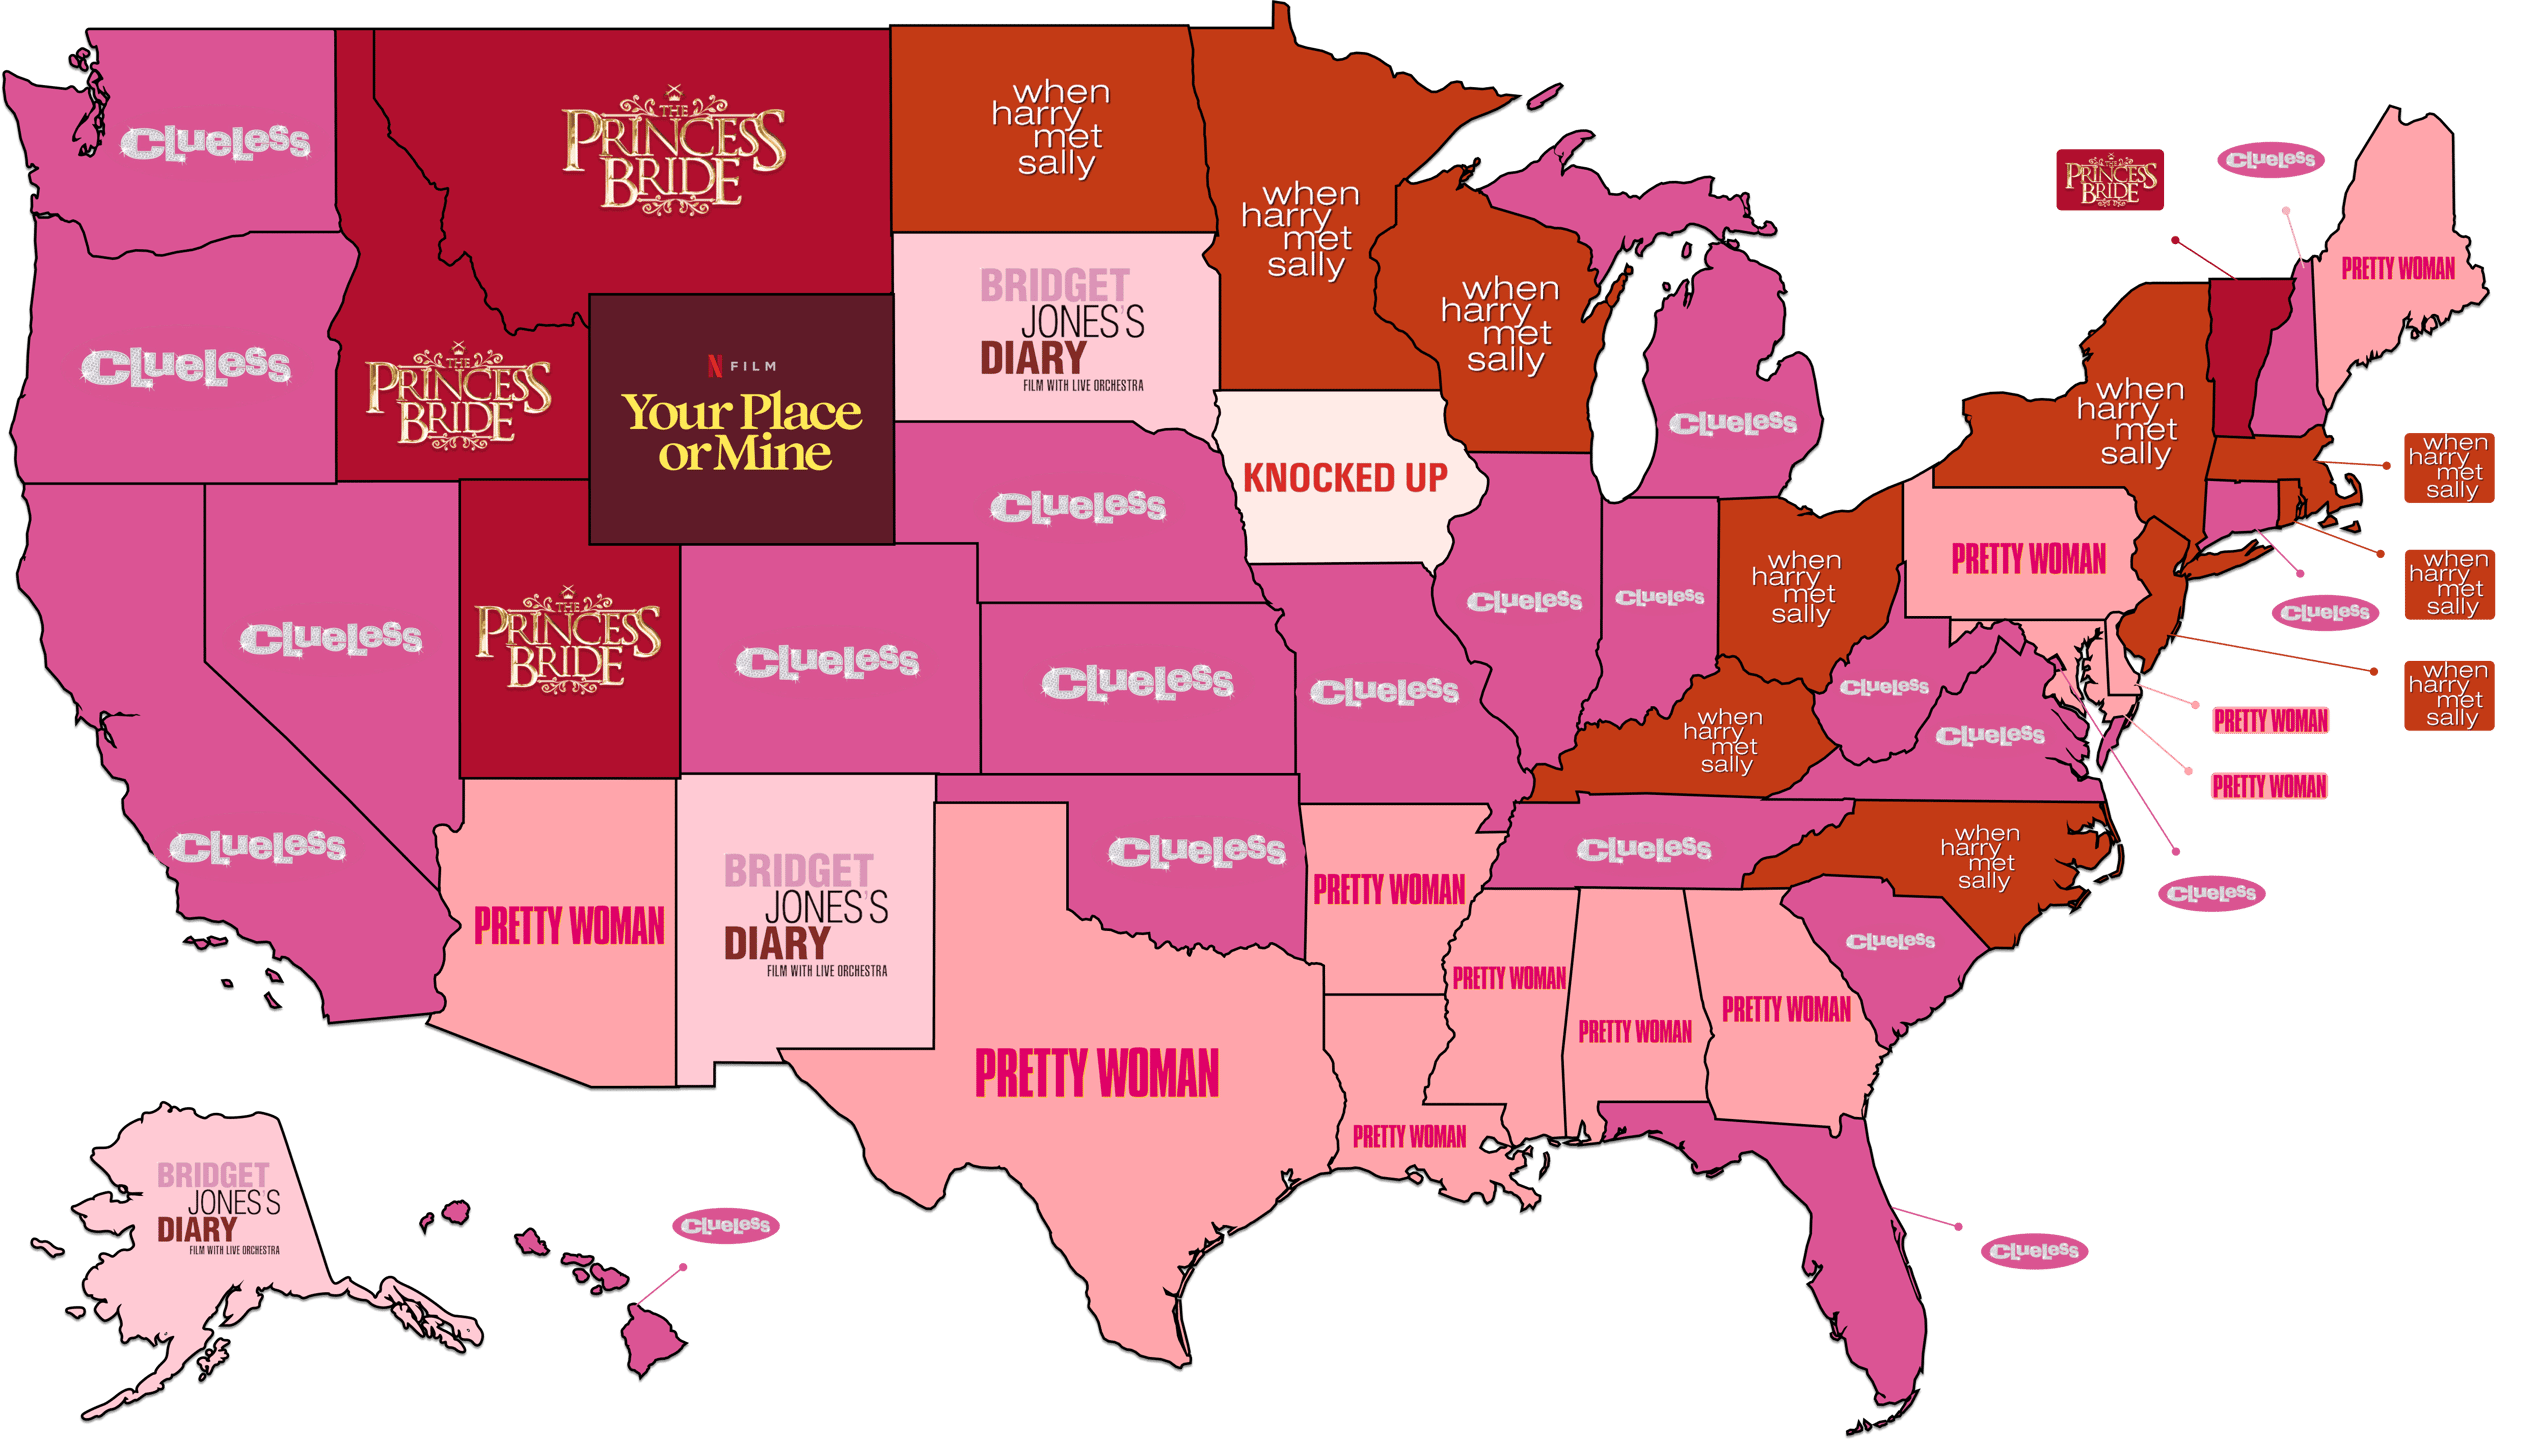 Favorite Rom Com by State